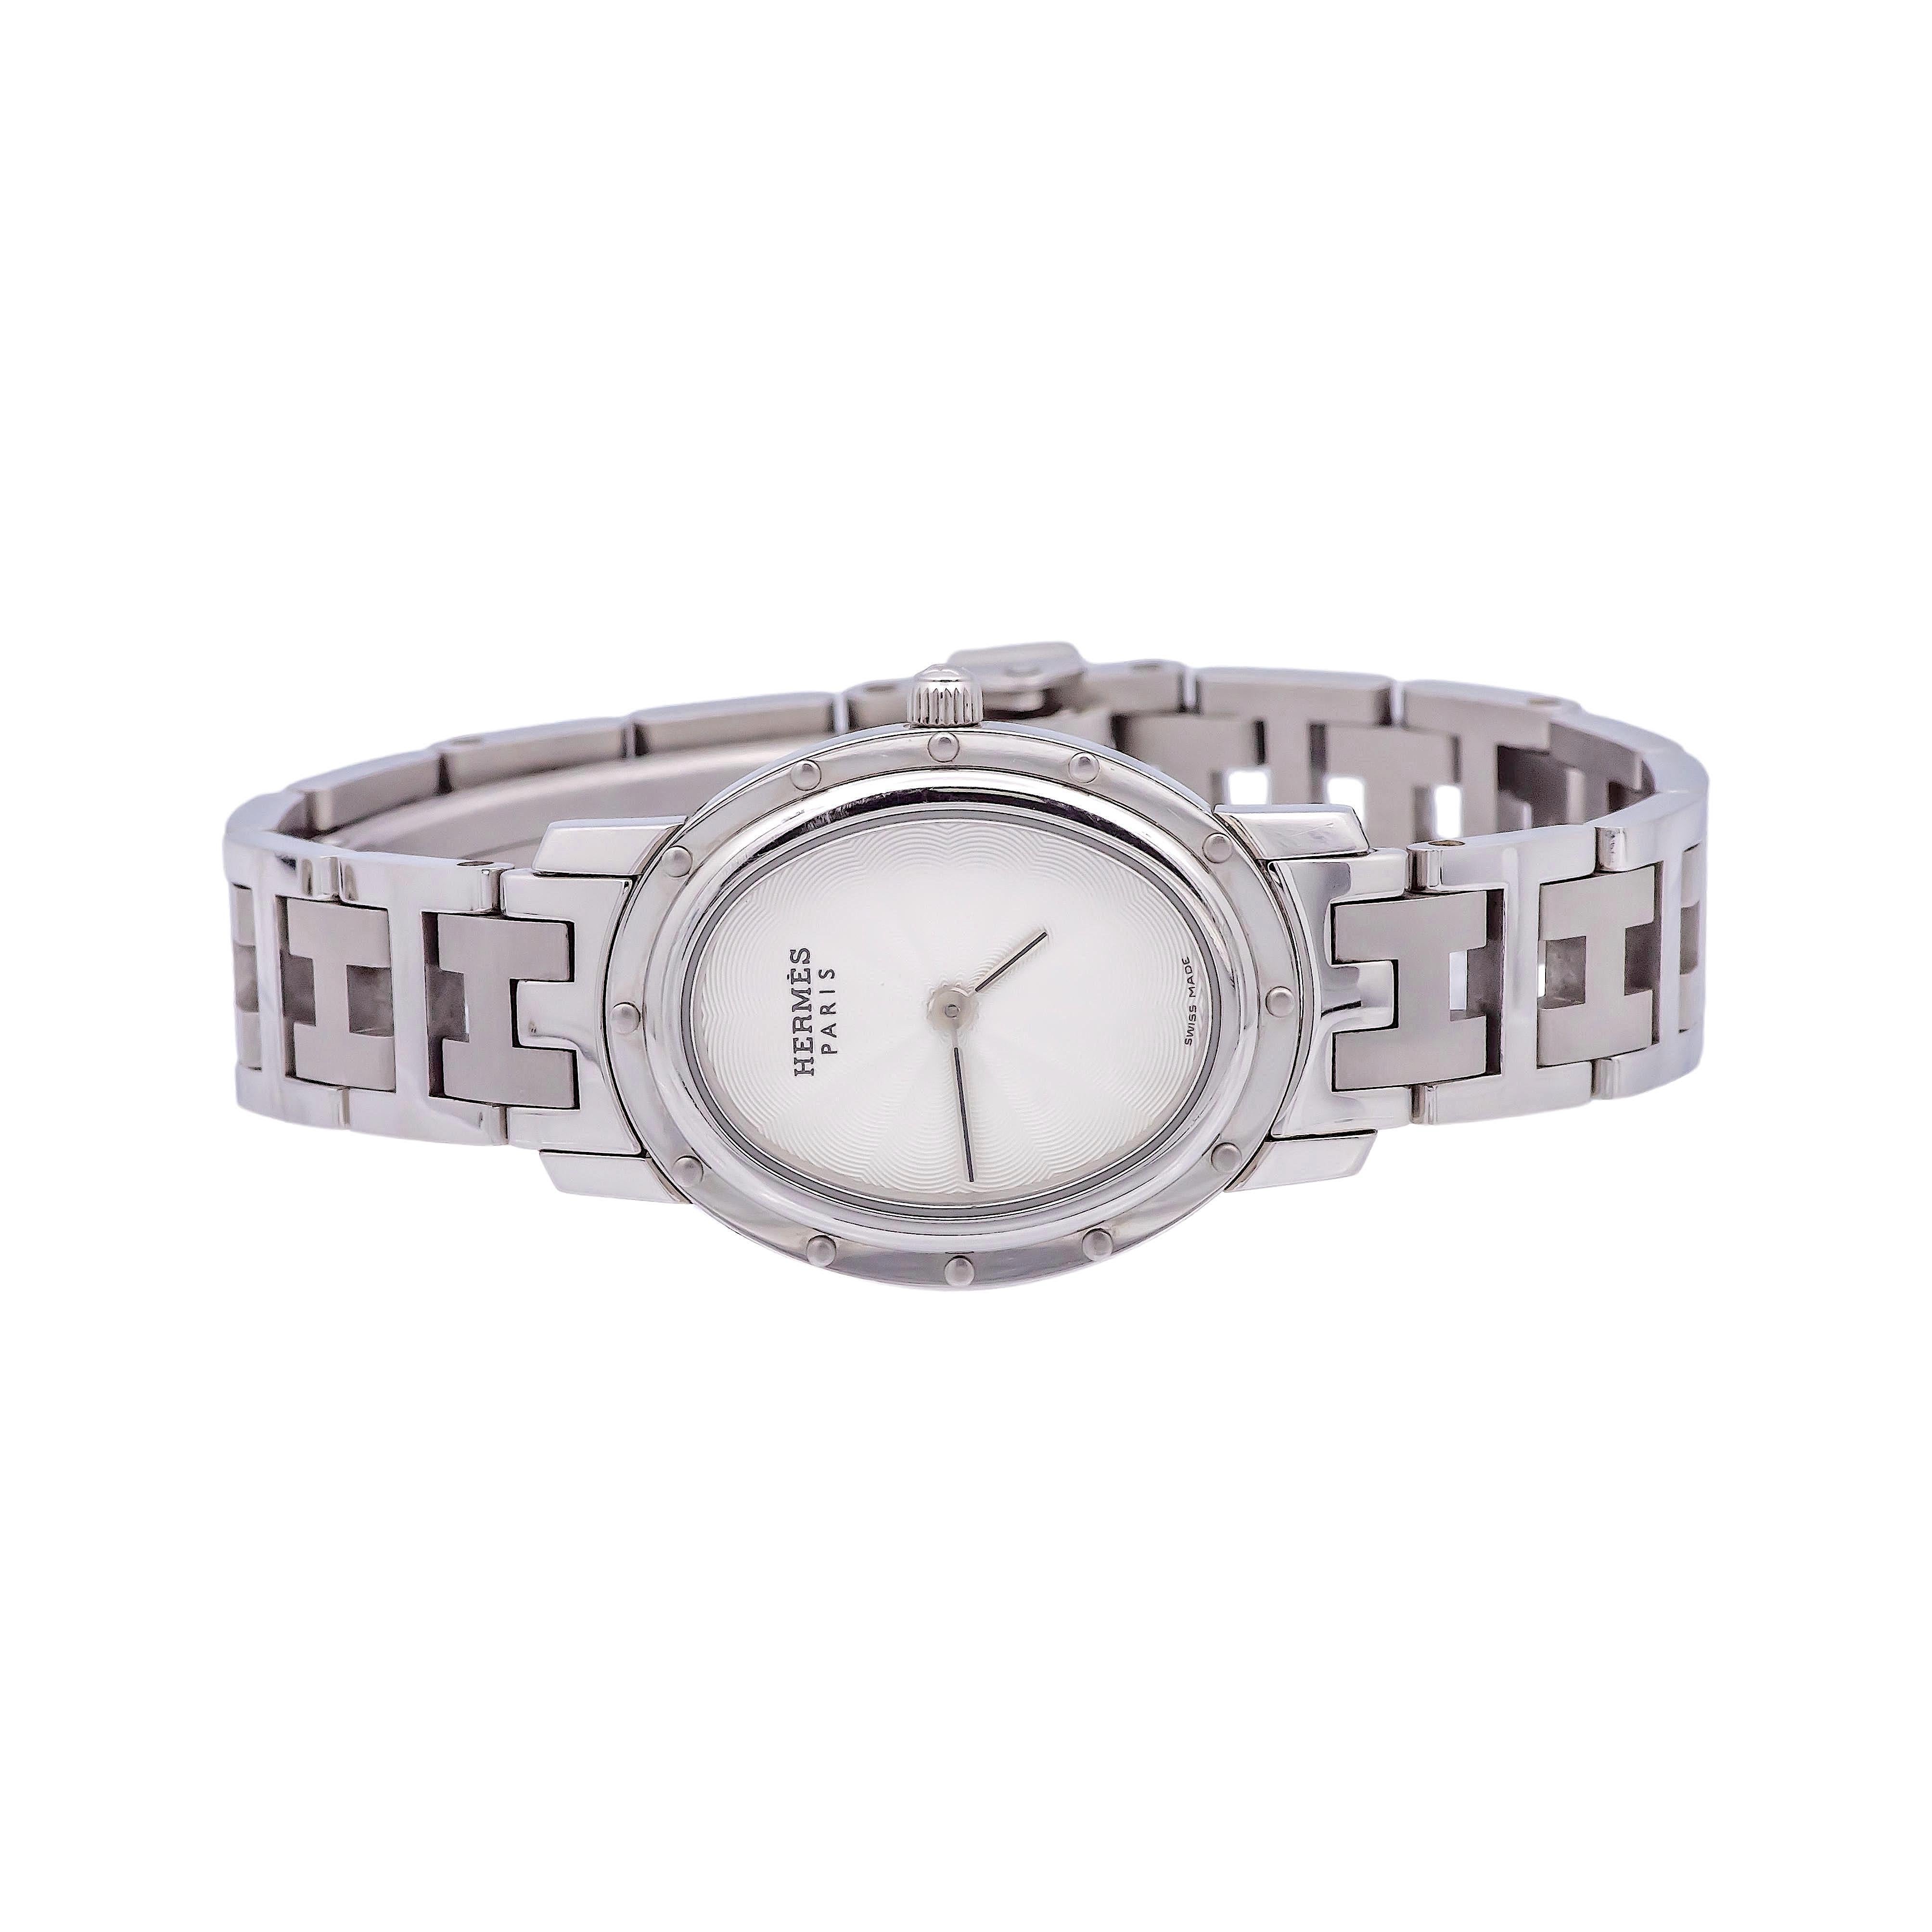 Pre-Owned Hermes Ladies watch from the Clipper collection finely crafted in stainless steel with an oval shape case and white silver dial with crown and analog display. Face measures 32.5mm x 22mm. Watch has a quartz movement and was made in